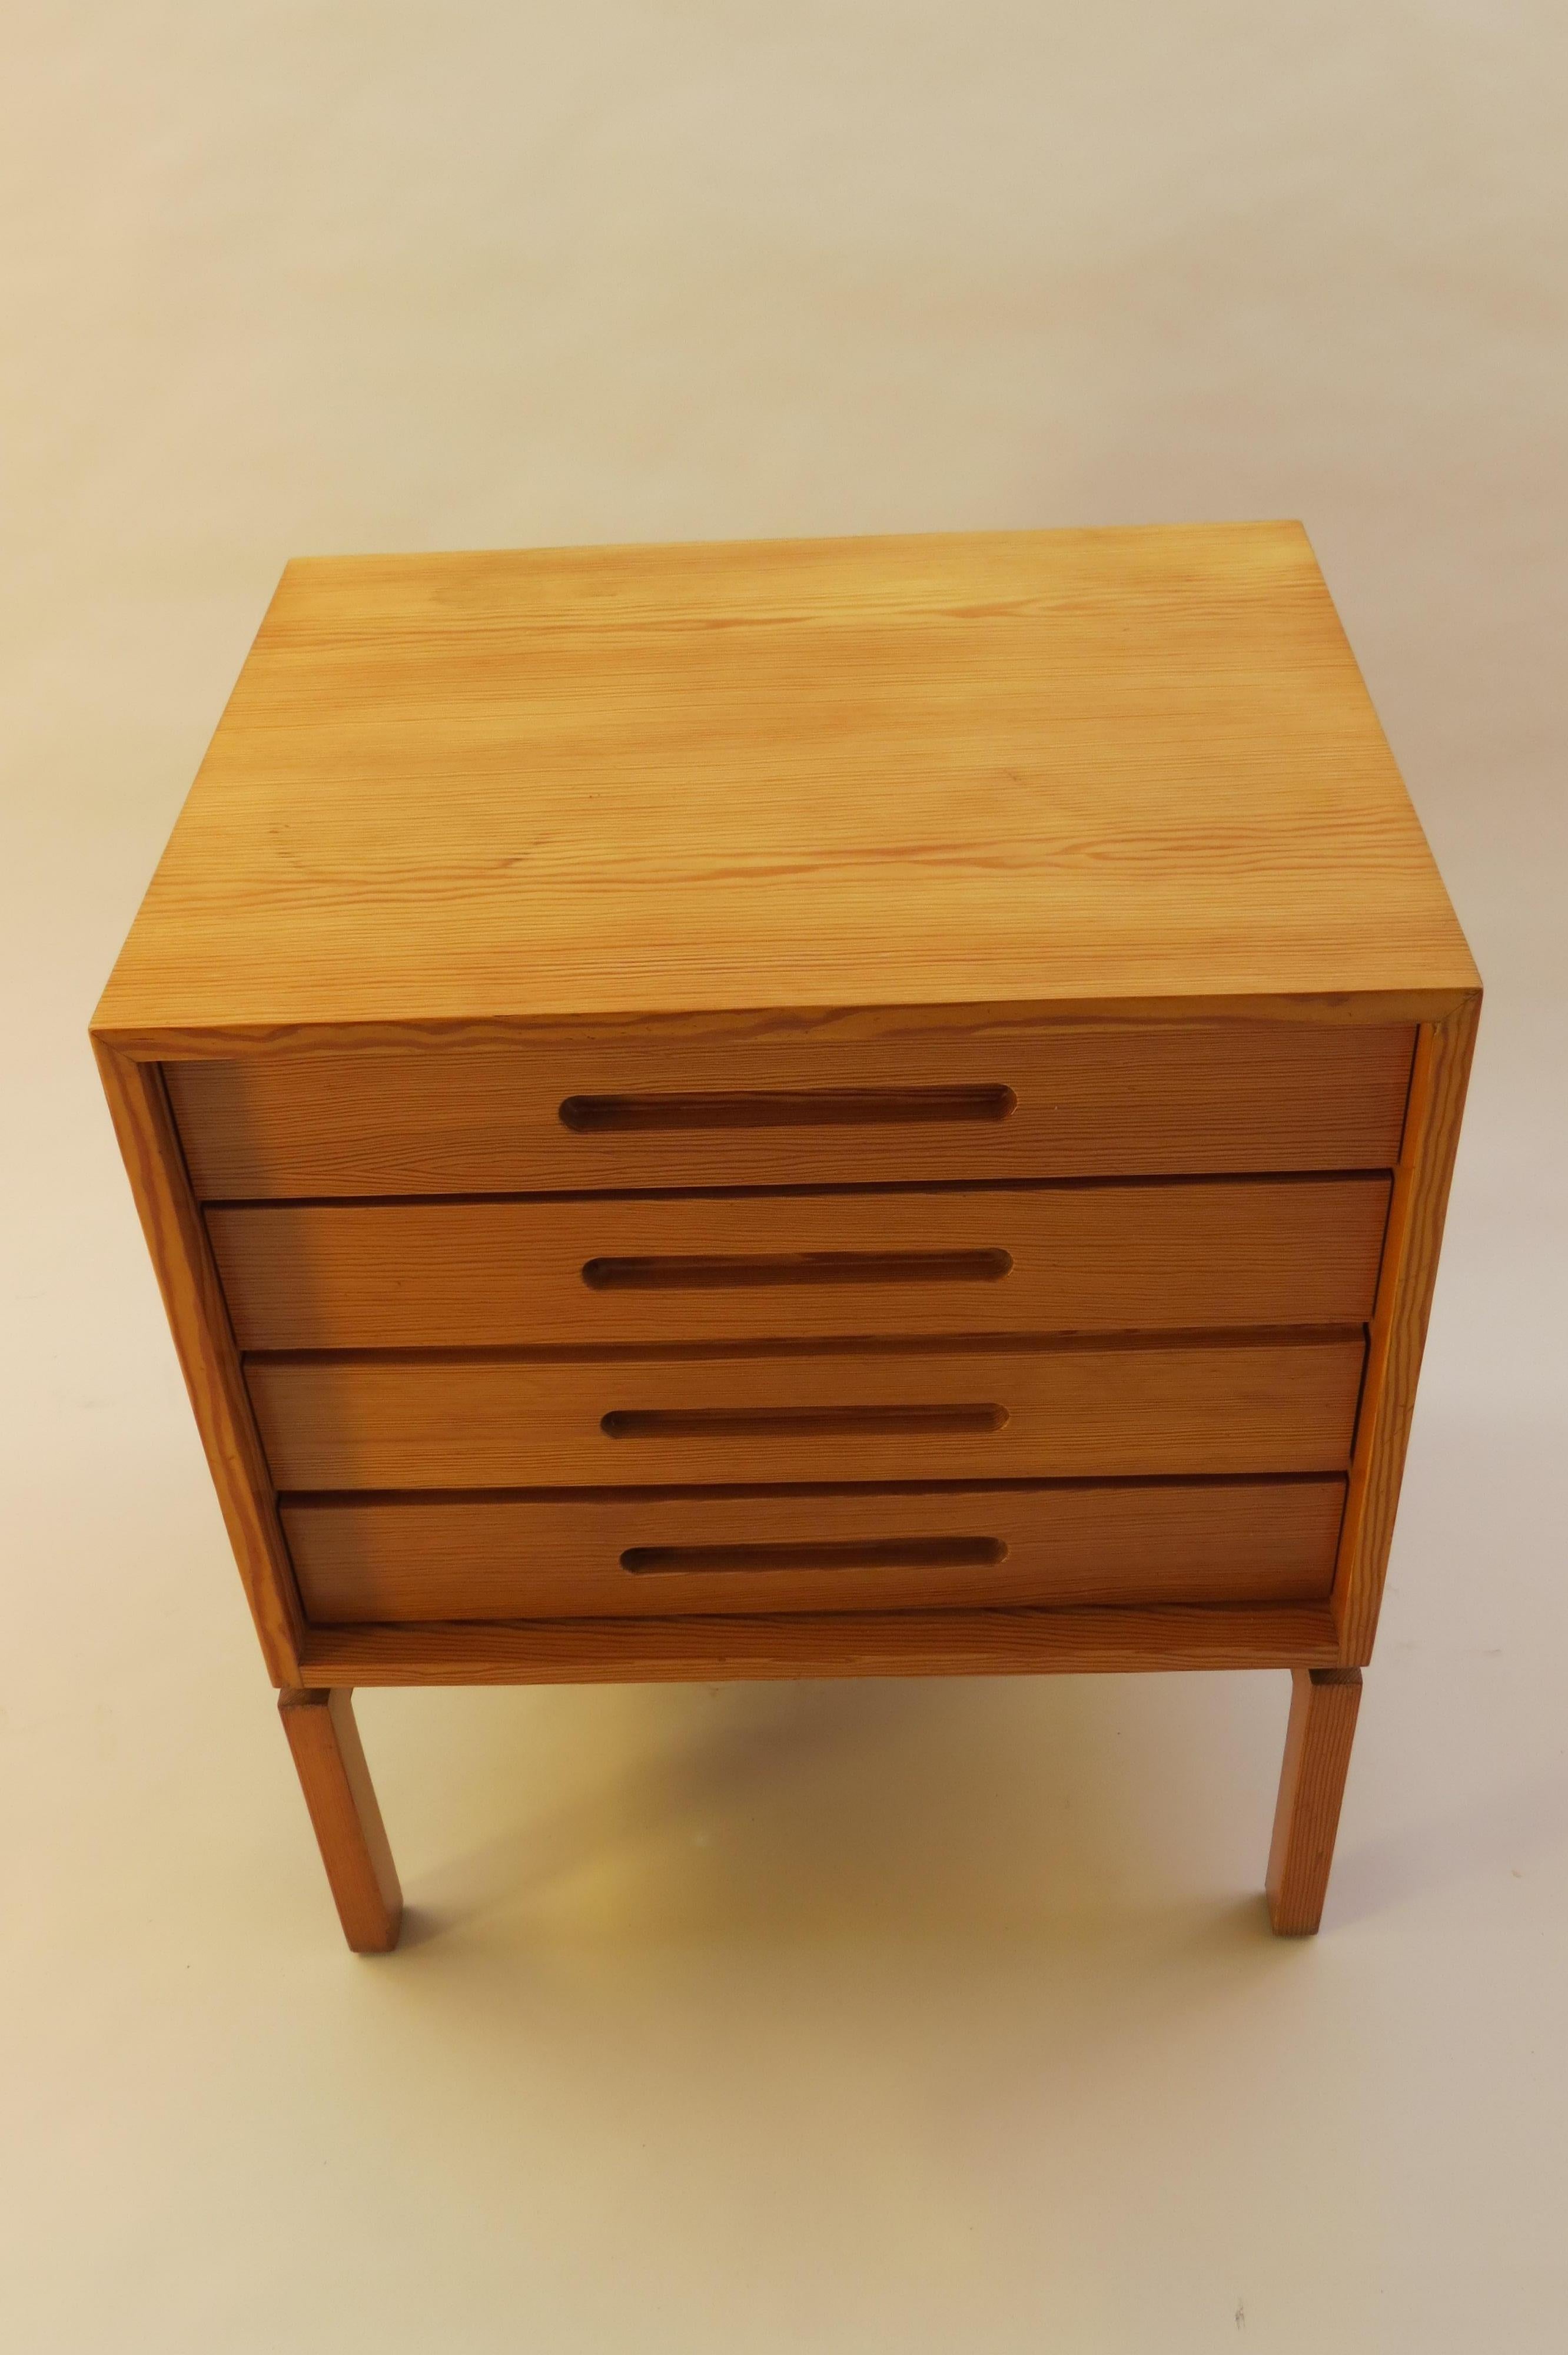 Wonderful chest of drawers dating from the 1970s. Made from solid and veneered Oregon pine.  The piece has four drawers that open with recessed handles. Lovely figurative grain to the wood to the sides and top.
The chest has pad feet to the